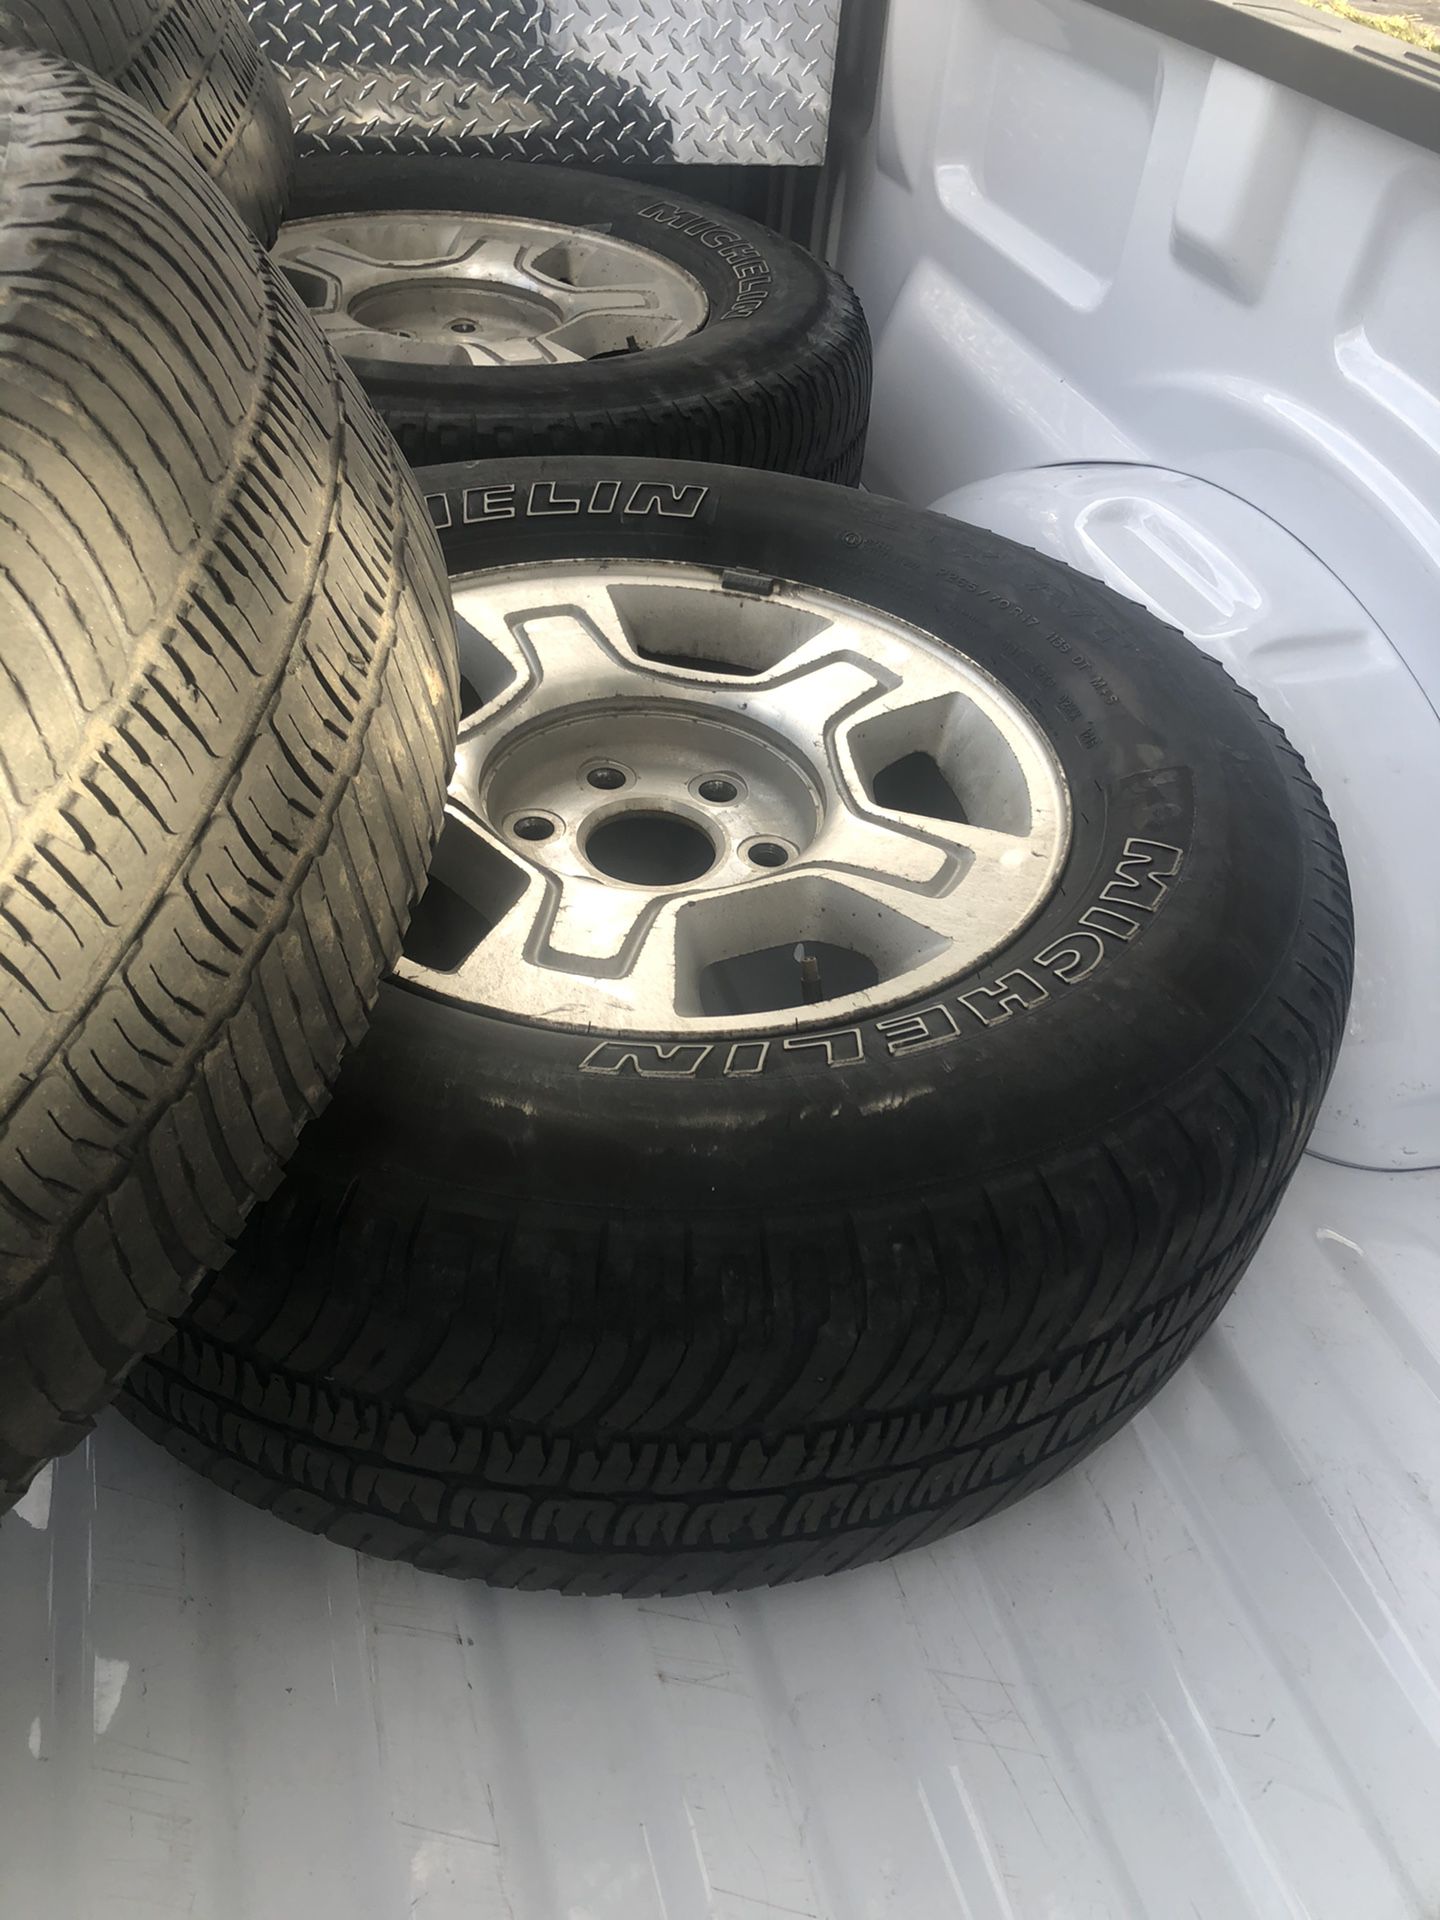 4 rims and tires -used Chevy hub cap covers and lug nuts included